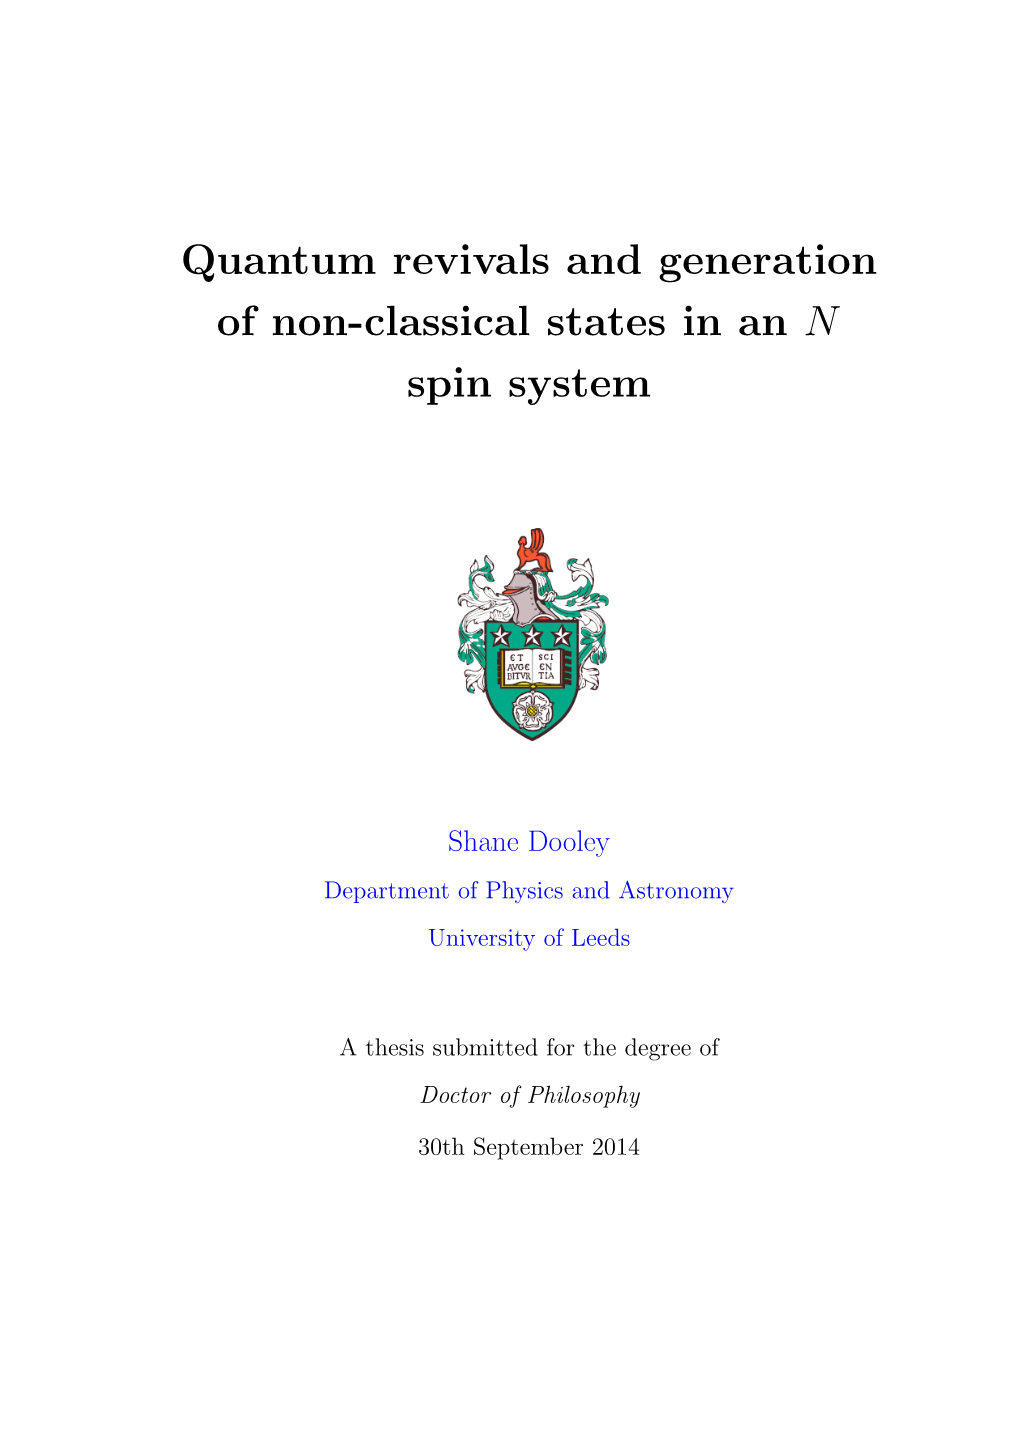 Quantum Revivals and Generation of Non-Classical States in an N Spin System